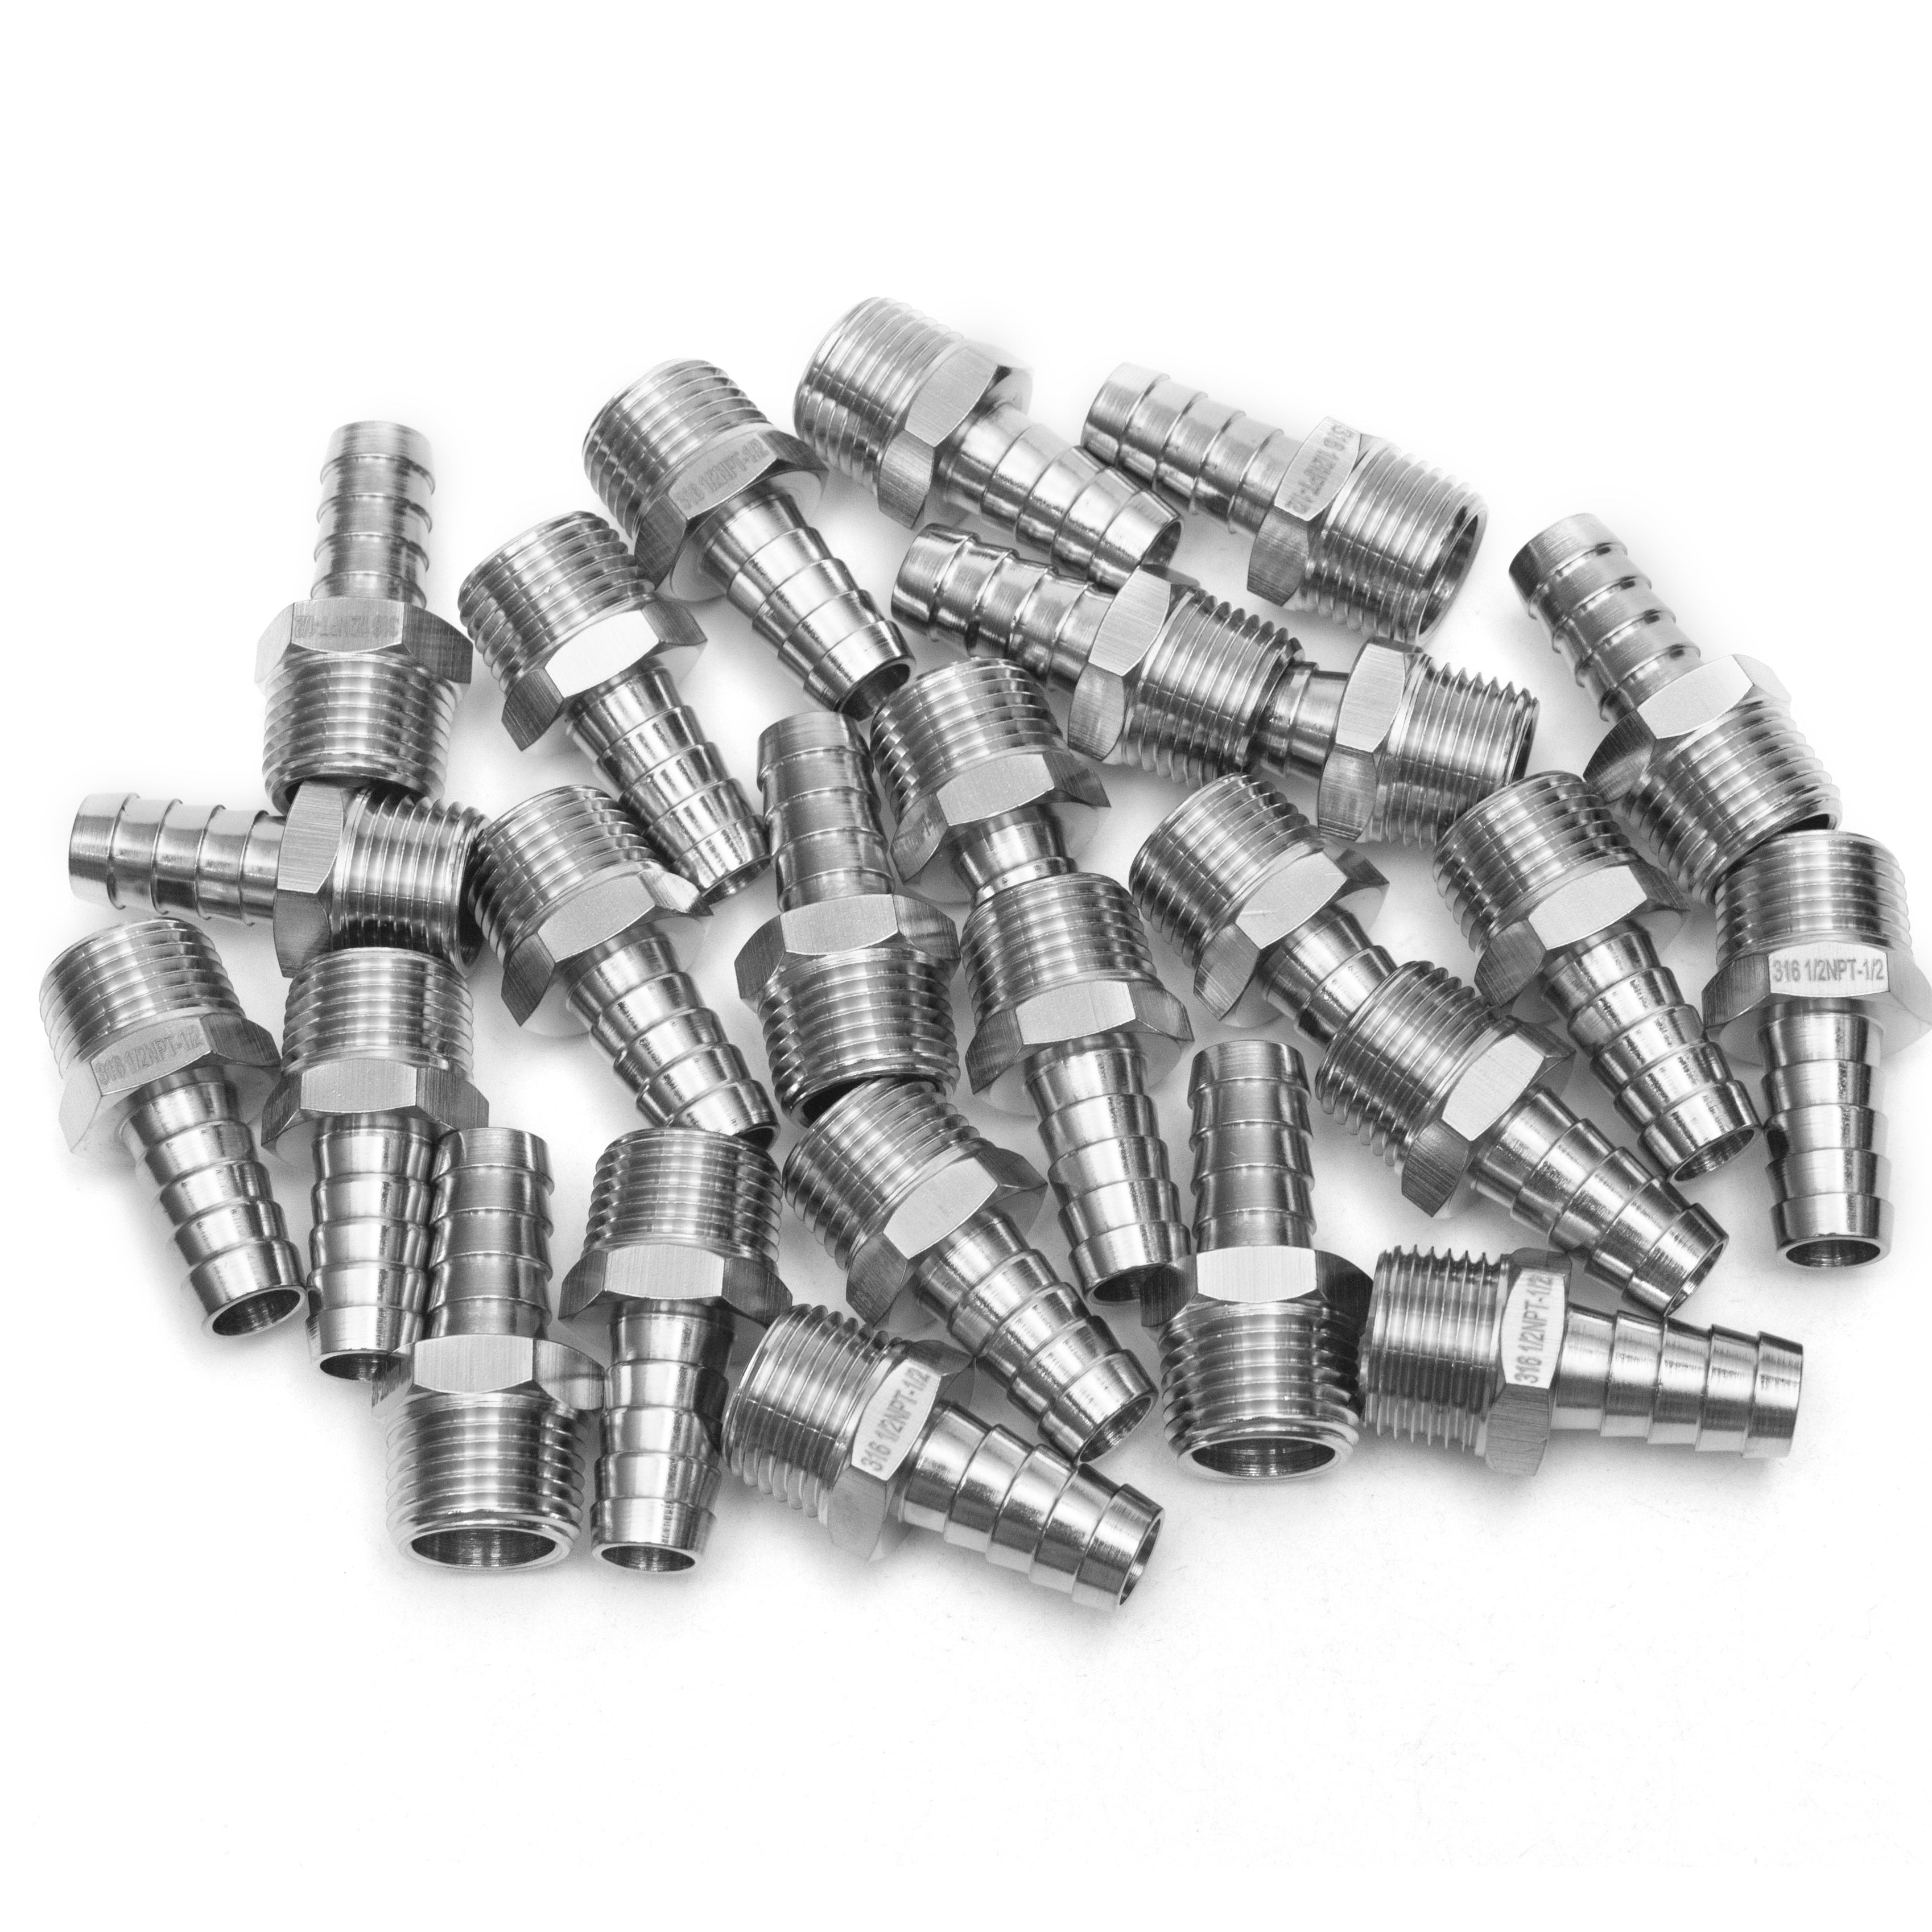 LTWFITTING Bar Production Stainless Steel 316 Barb Fitting Coupler/Connector 1/2 Inch Hose ID x 1/2 Inch Male NPT Air Fuel Water (Pack of 25)